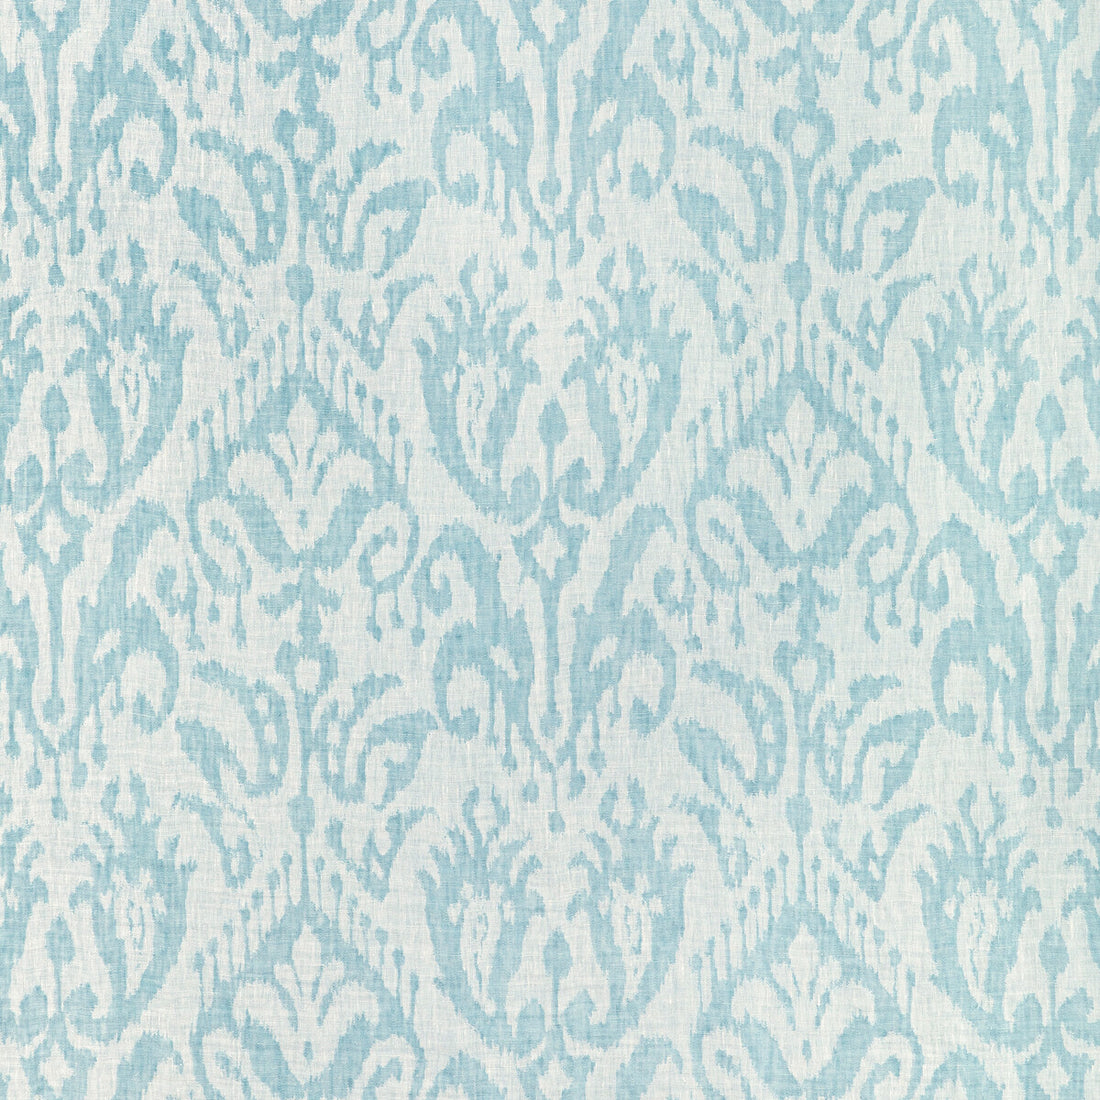 Leandro Sheer fabric in capri color - pattern 2021121.15.0 - by Lee Jofa in the Summerland collection